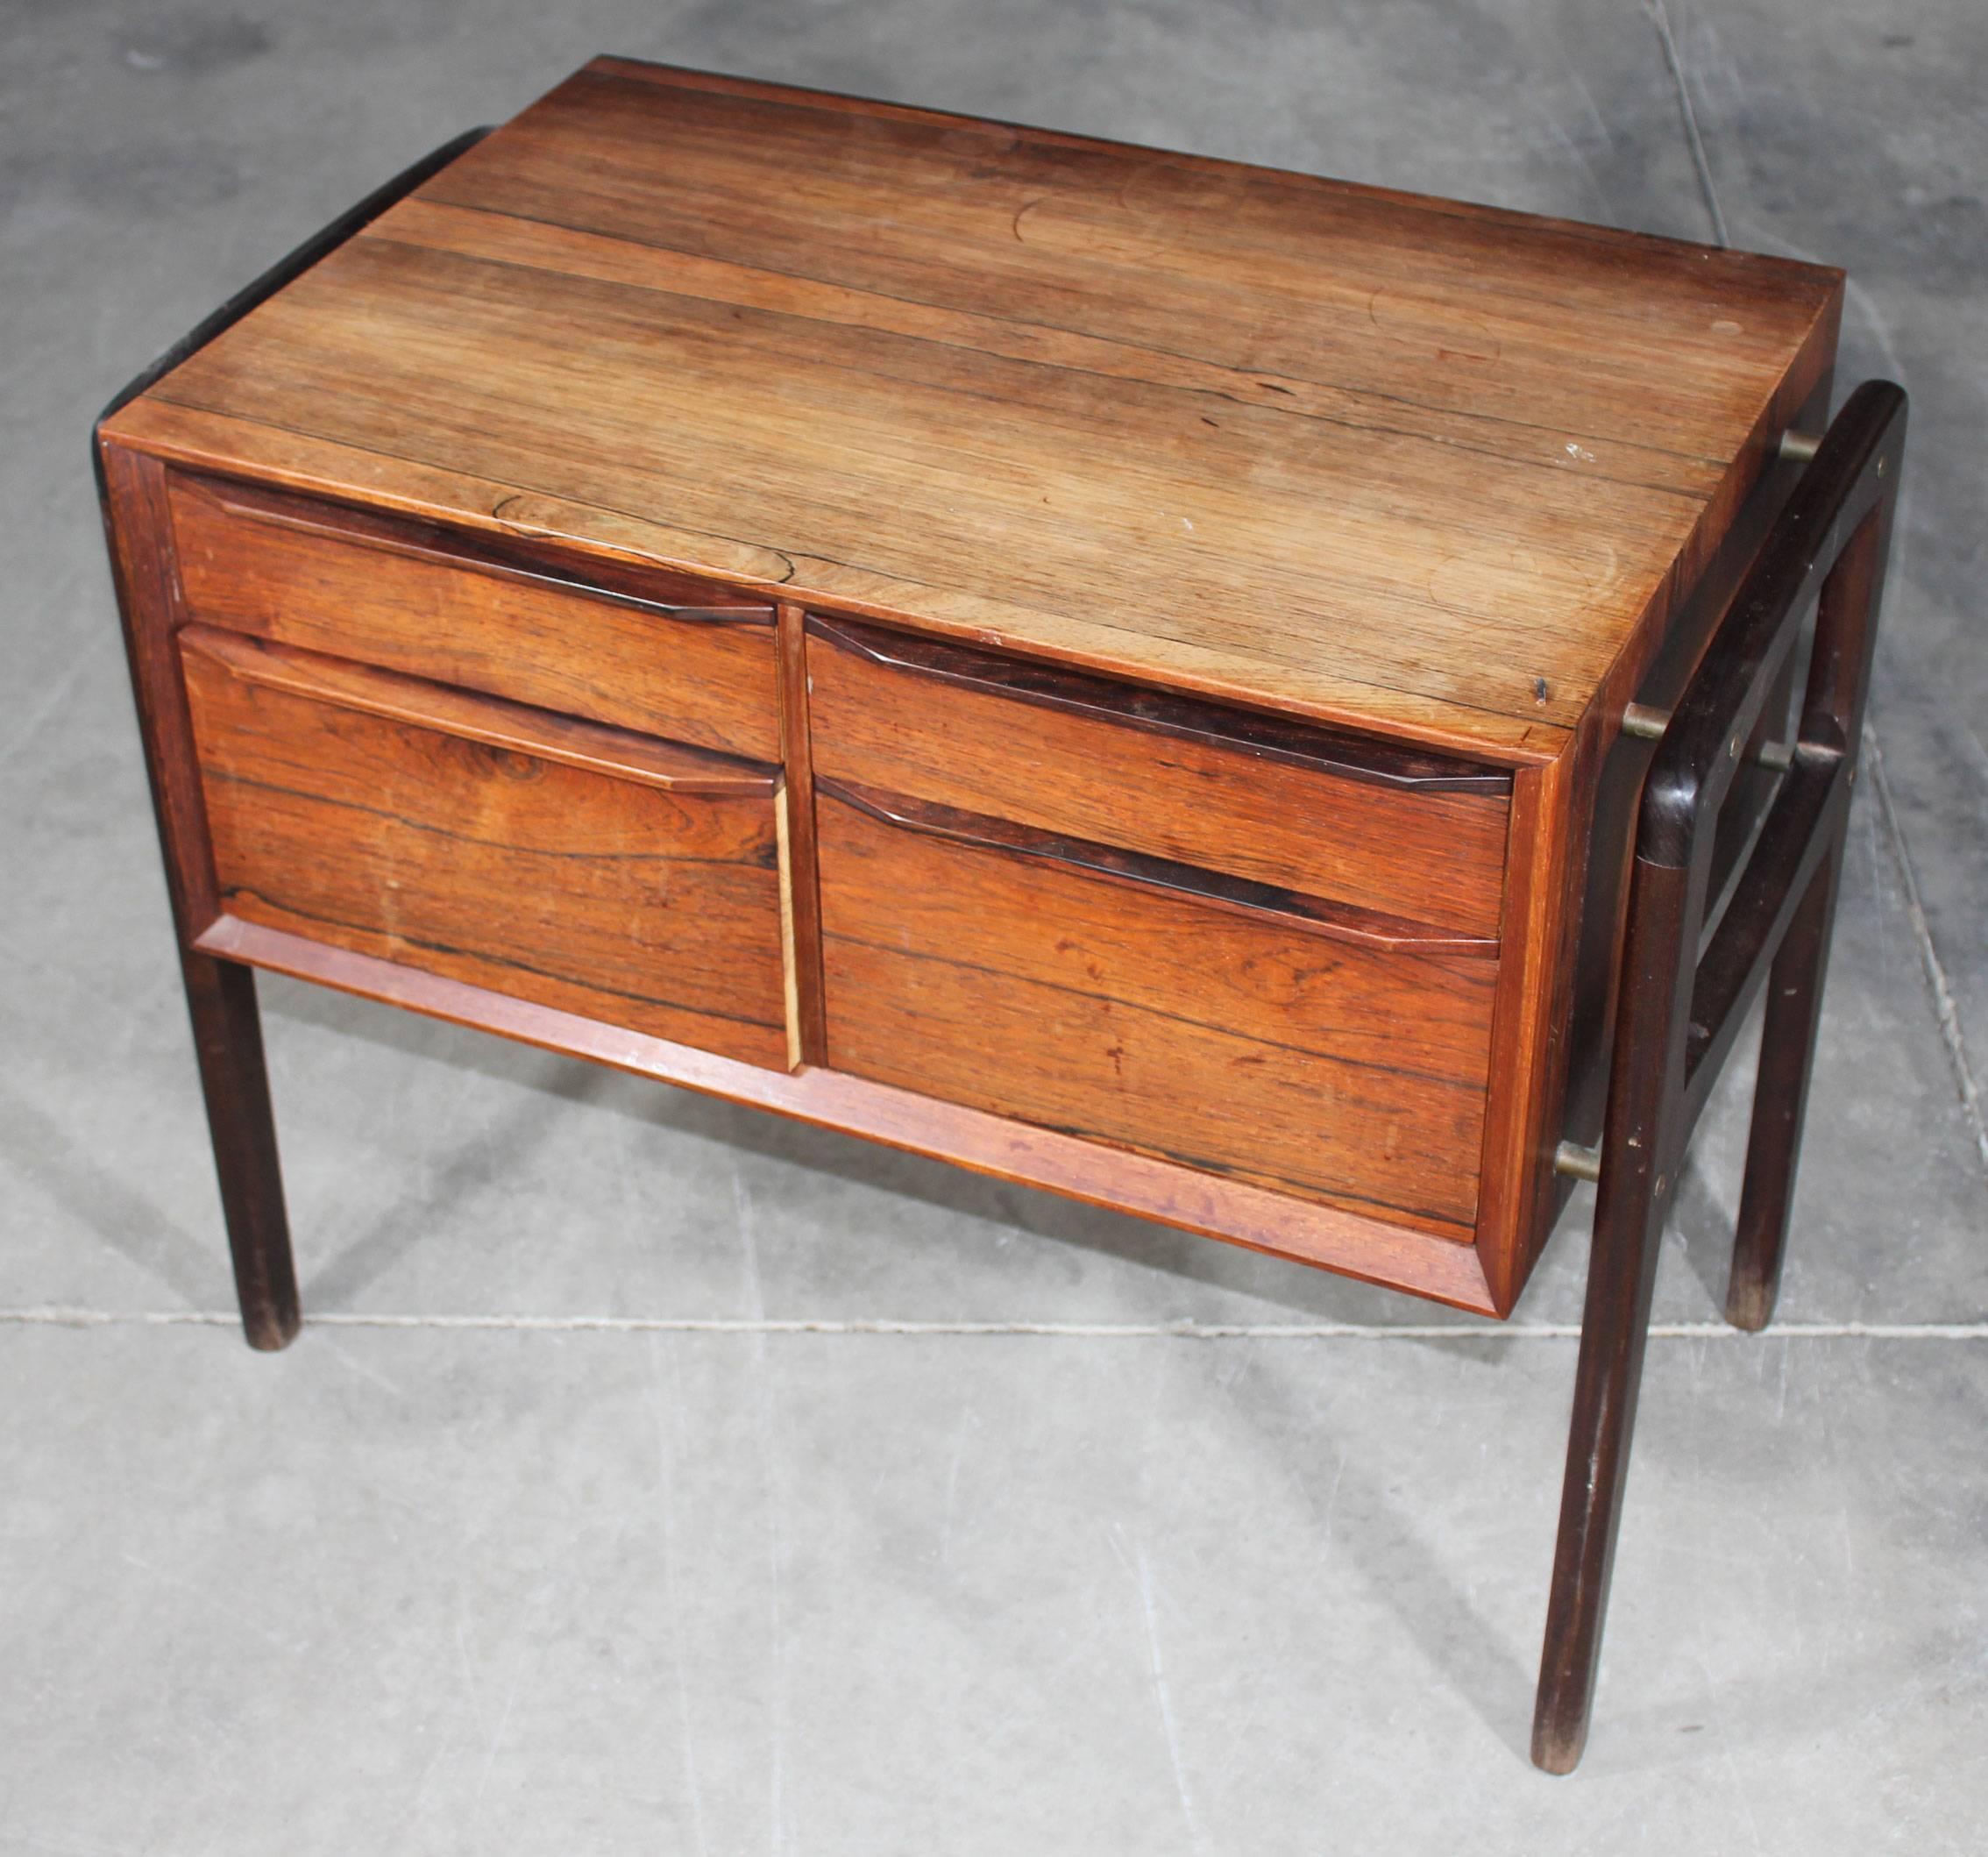 Vintage scandinavian 50's rosewood side table with four drawers.